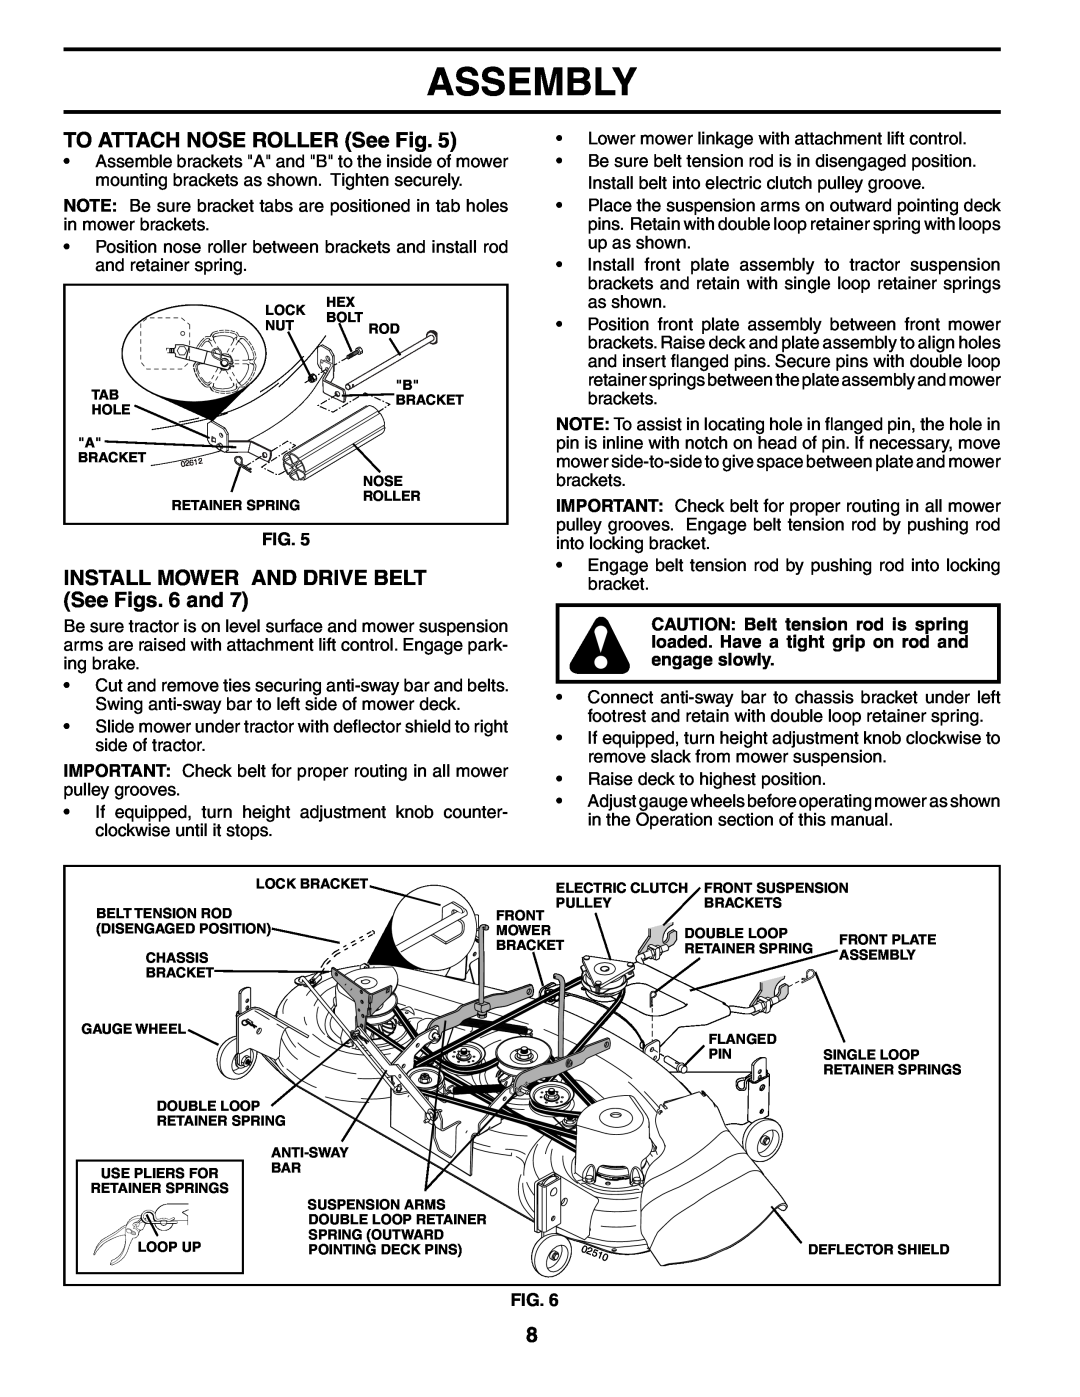 Poulan 954569516, 185498 owner manual TO ATTACH NOSE ROLLER See Fig, INSTALL MOWER AND DRIVE BELT See Figs. 6 and, Assembly 